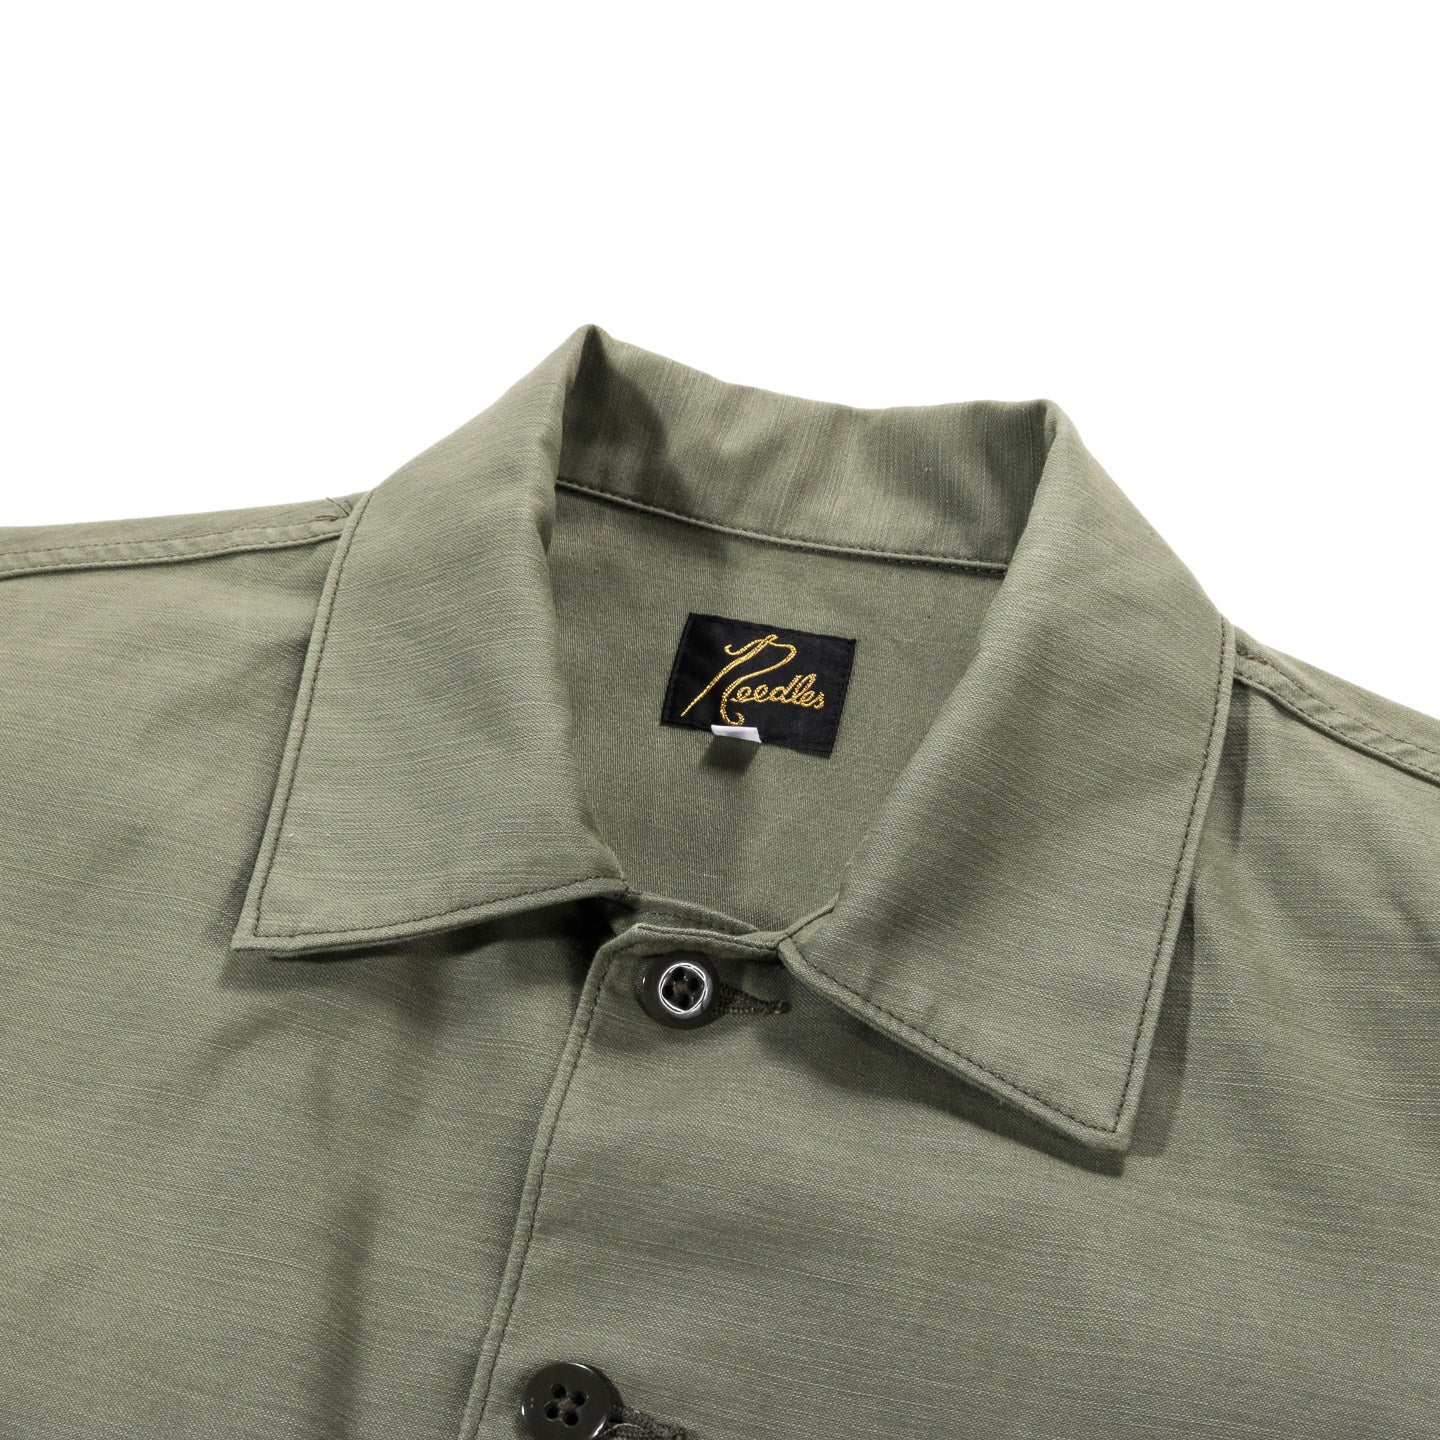 NEEDLES S/S FATIGUE SHIRT BACK SATEEN OLIVE